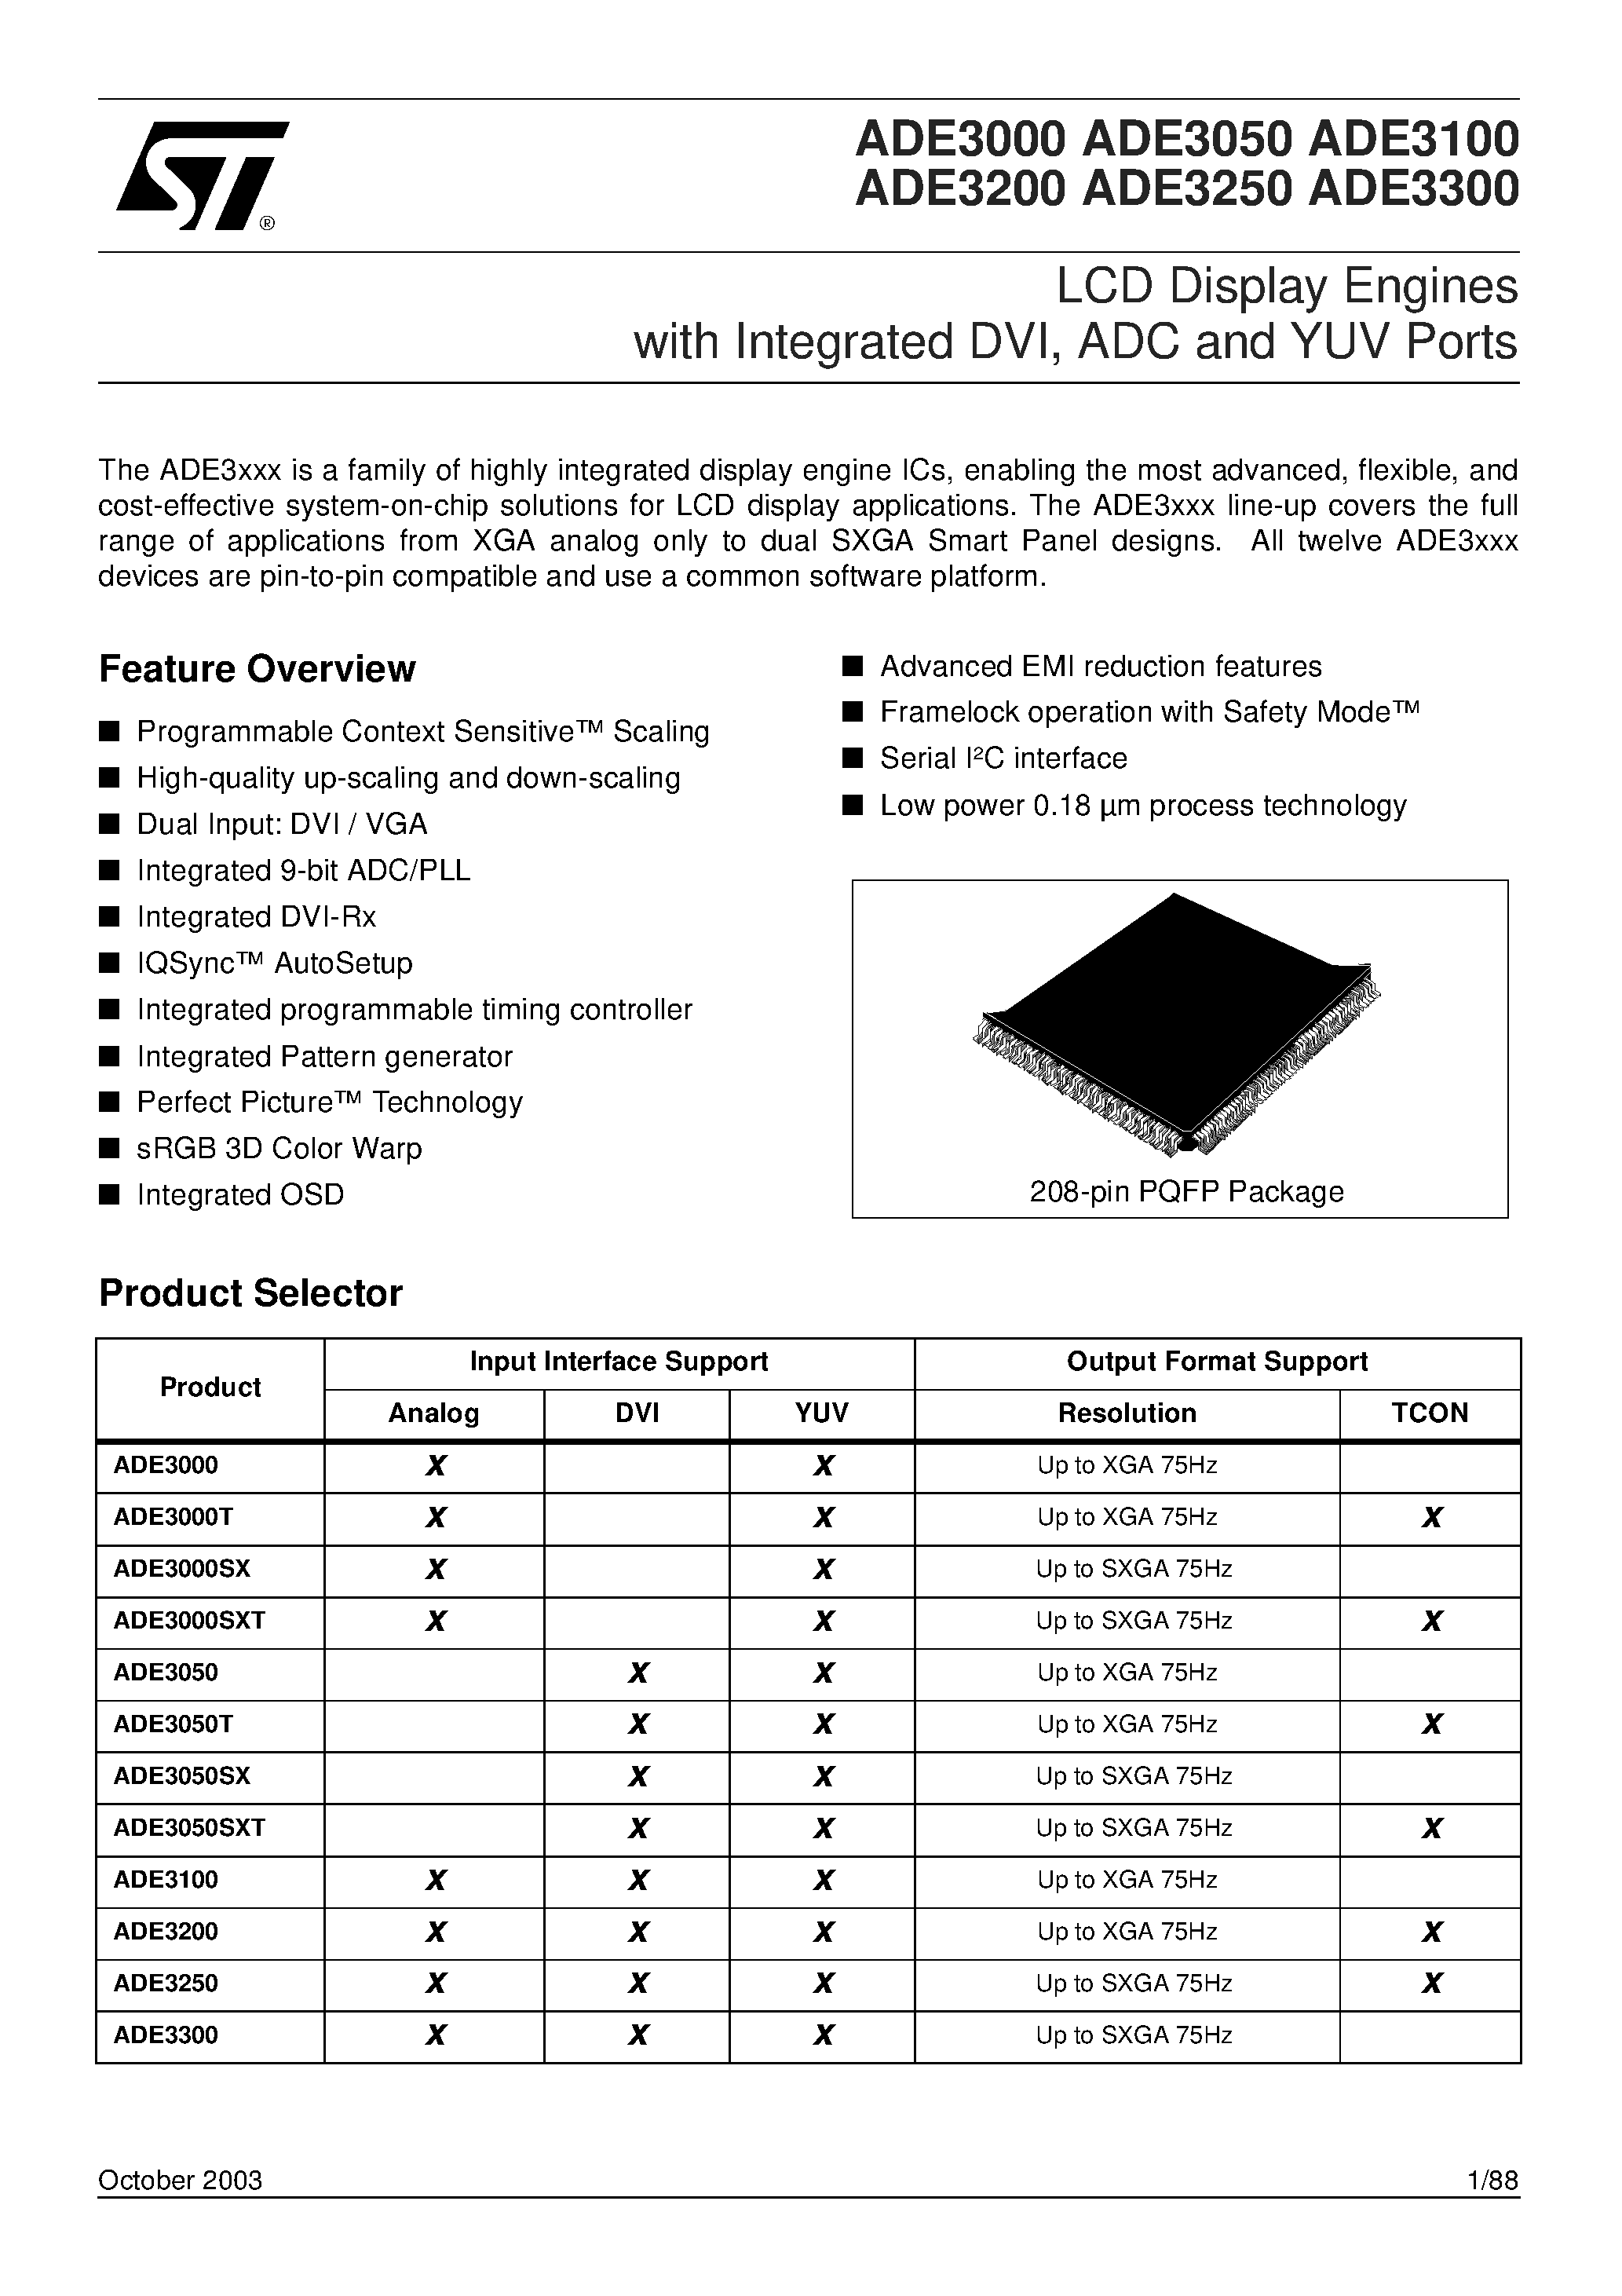 Datasheet ADE3000T - LCD Display Engines with Integrated DVI/ ADC and YUV Ports page 1